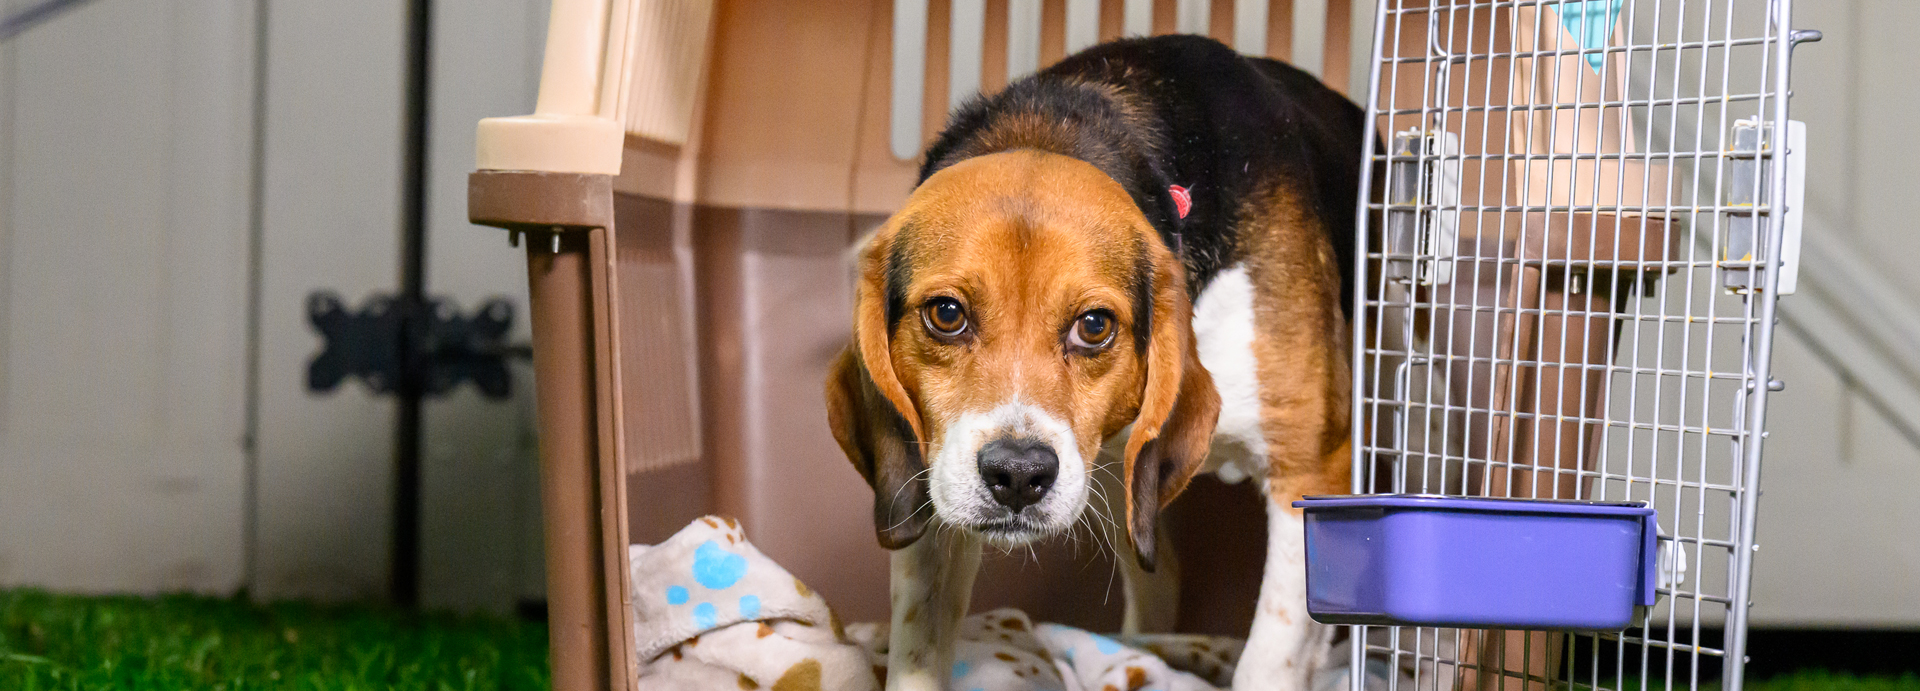 200+ research dogs, cats freed as beagle group shuts down facility. How you can help